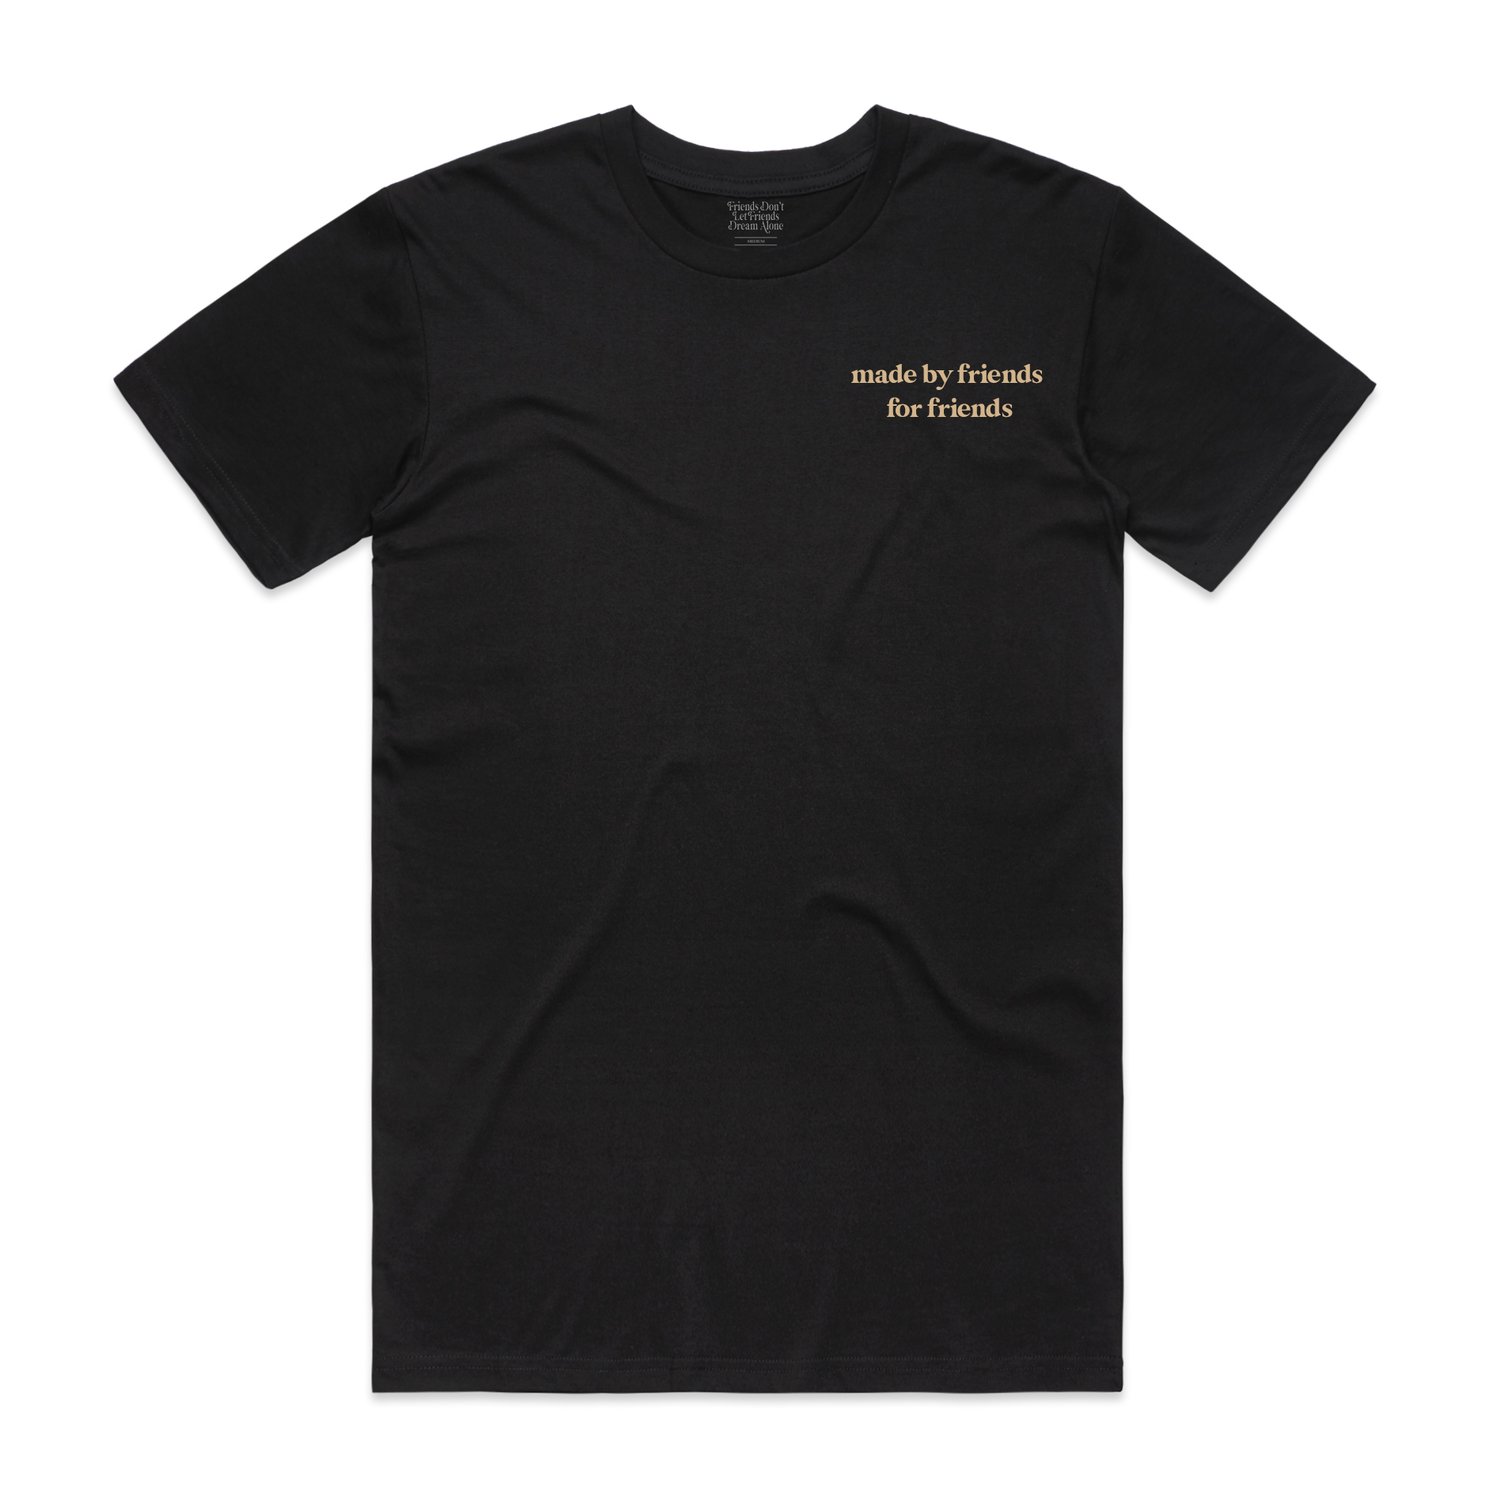 Image of Black "Made By Friends For Friends" Collaboration Tee